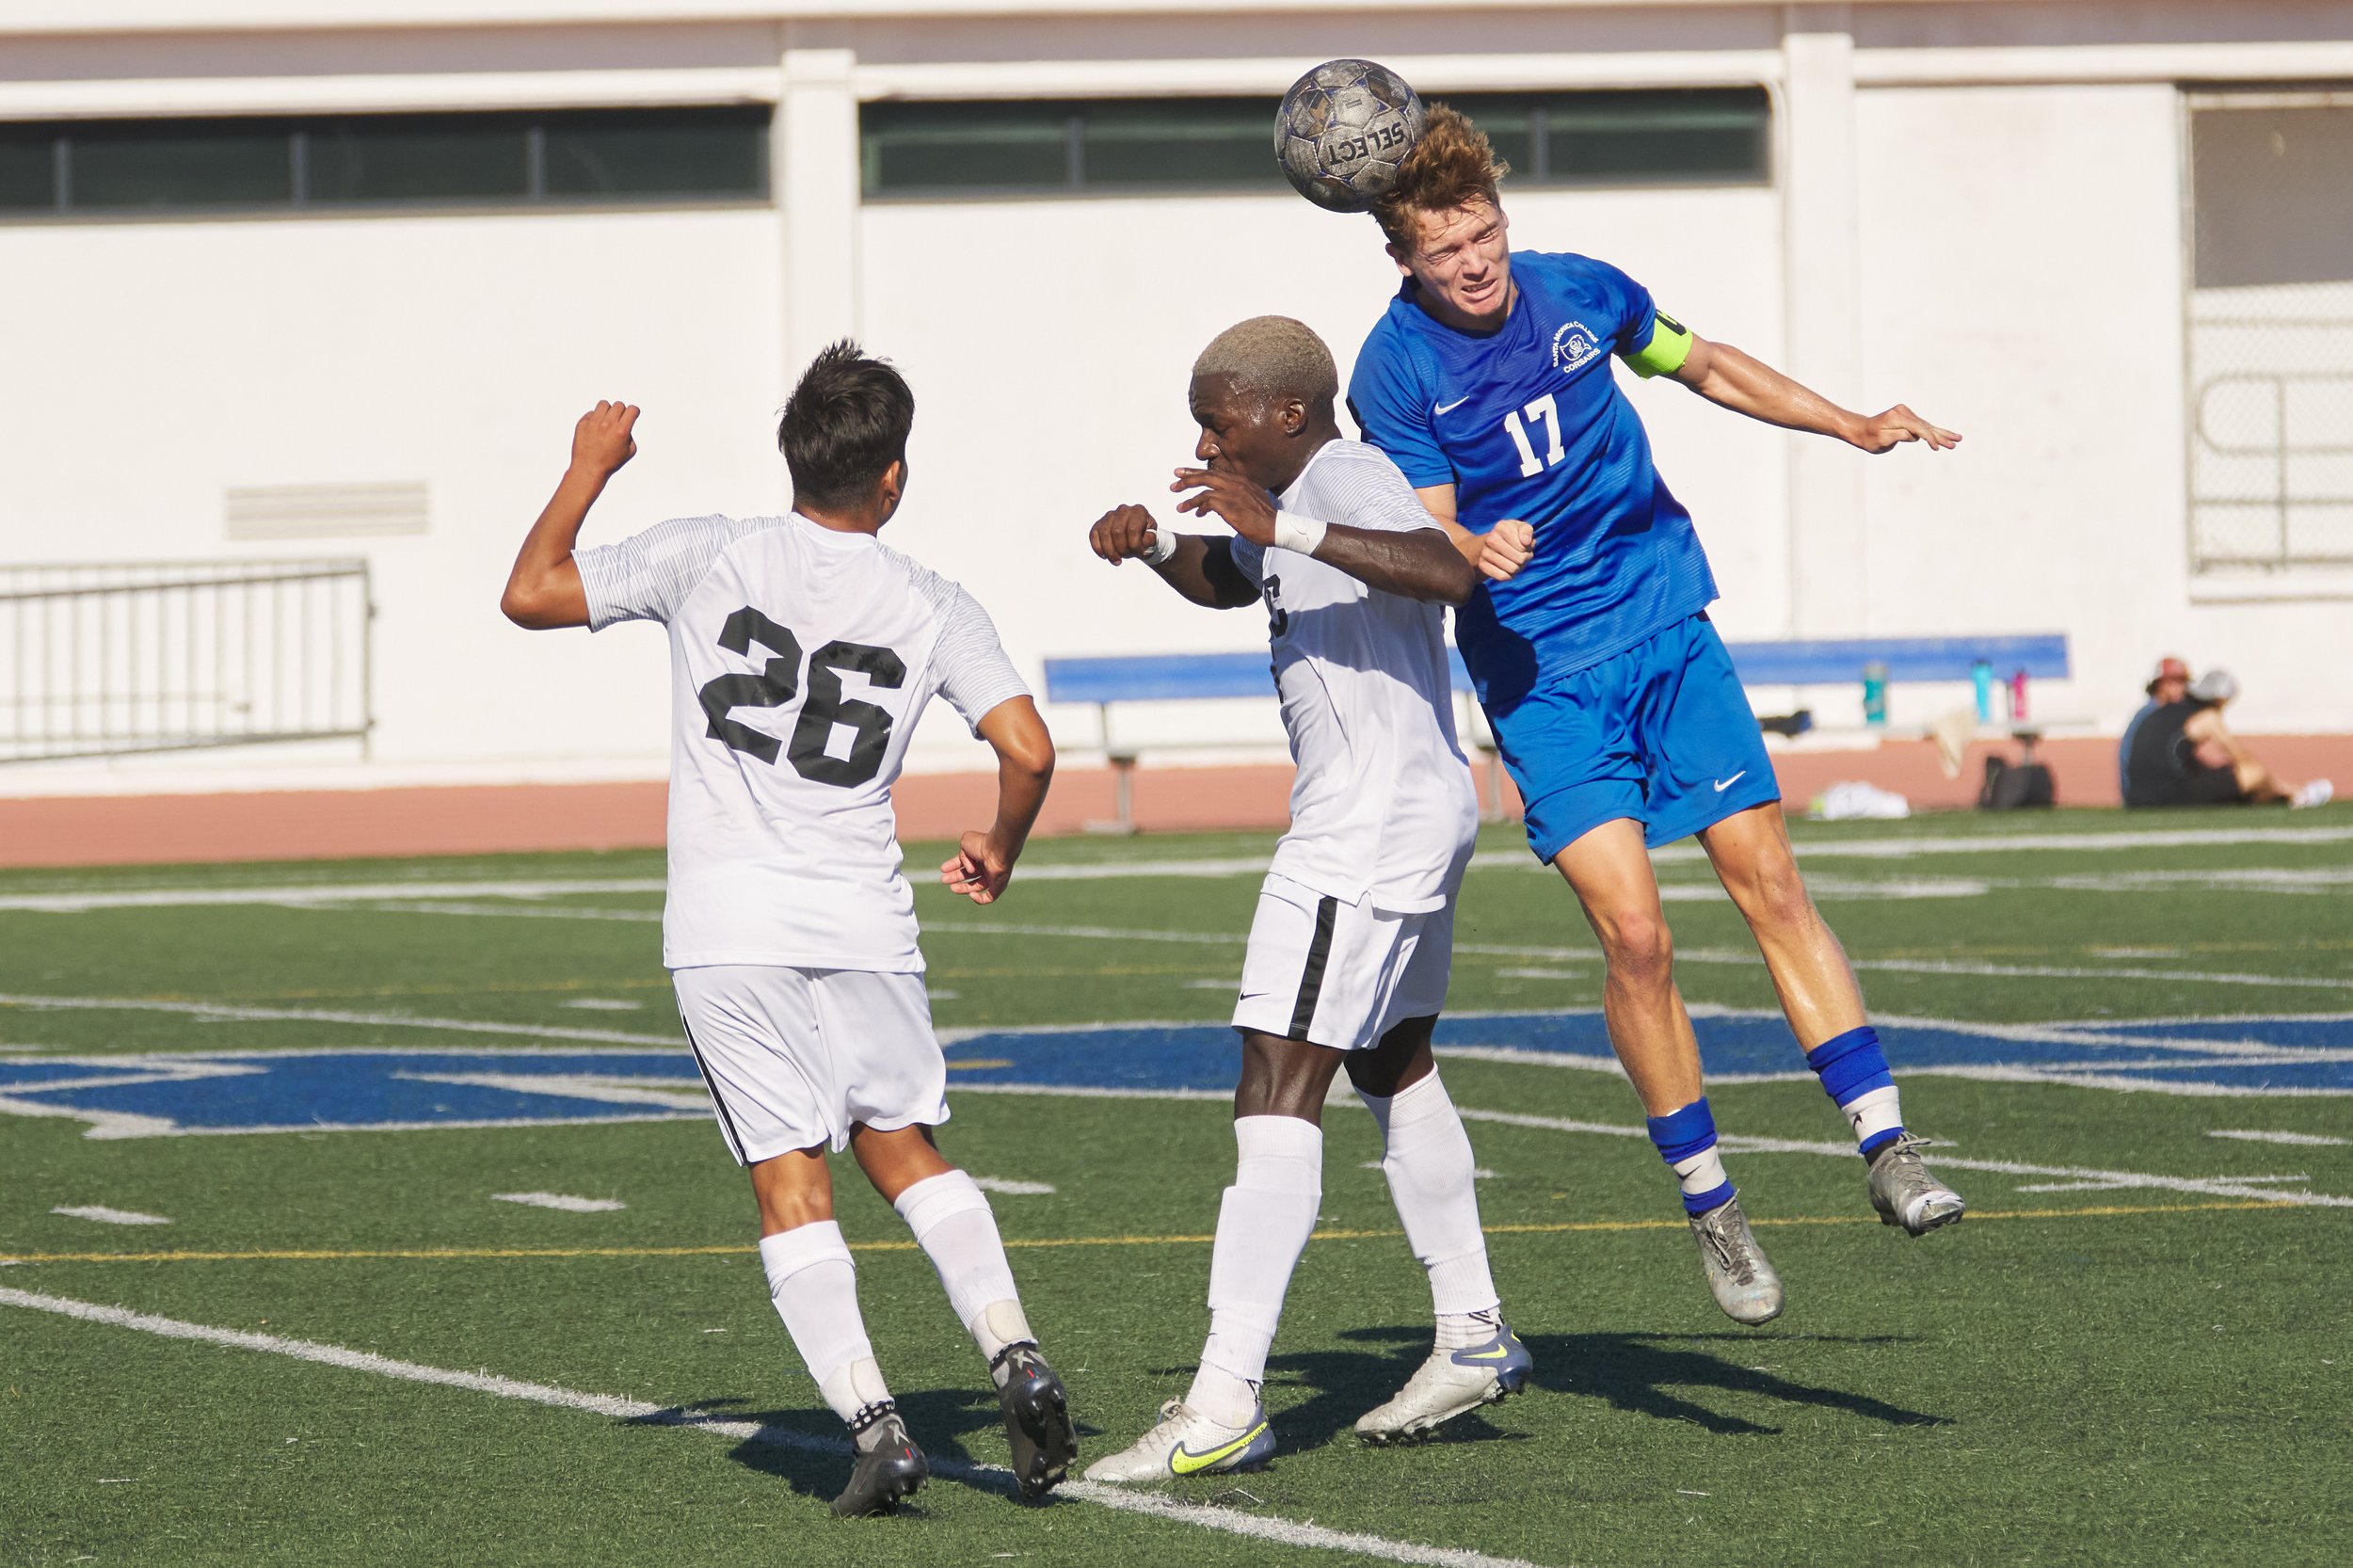  Santa Monica College Corsairs' Taj Winnard (right), and Rio Hondo College Roadrunners' Charlie Rosales (left) and Ebenezer Chinne (center) during the men's soccer match on Friday, Sept. 24, 2022, at Corsair Field in Santa Monica, Calif. The Corsairs